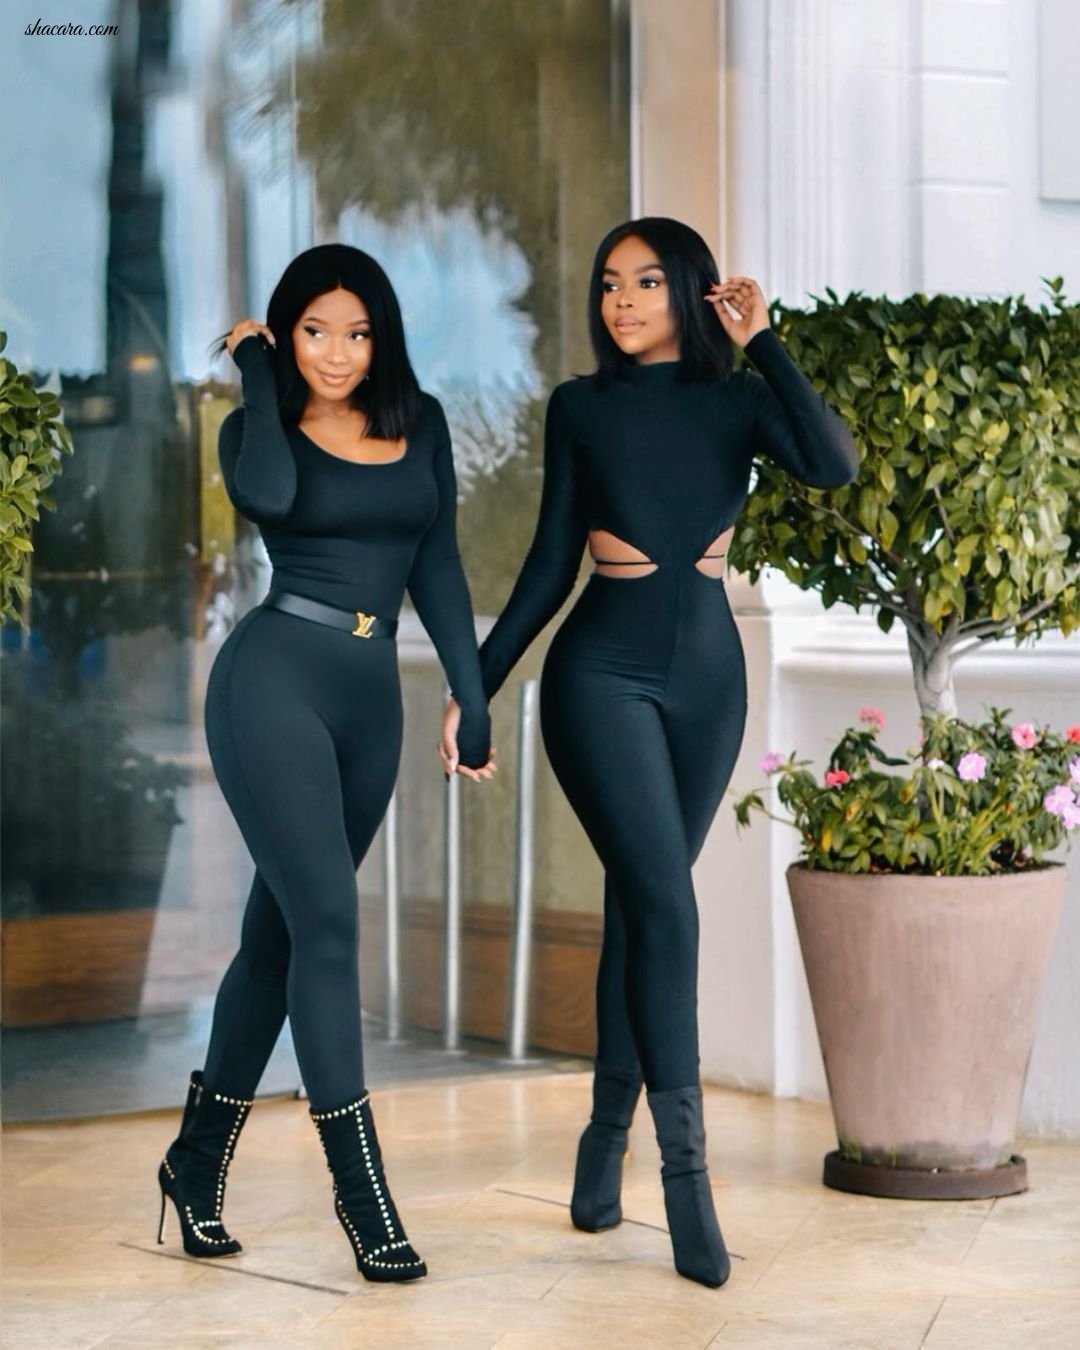 #HOTSHOTS: These Two South African Based Beauties Just Lit The Internet Of Fire With Their ‘All Black’ Look